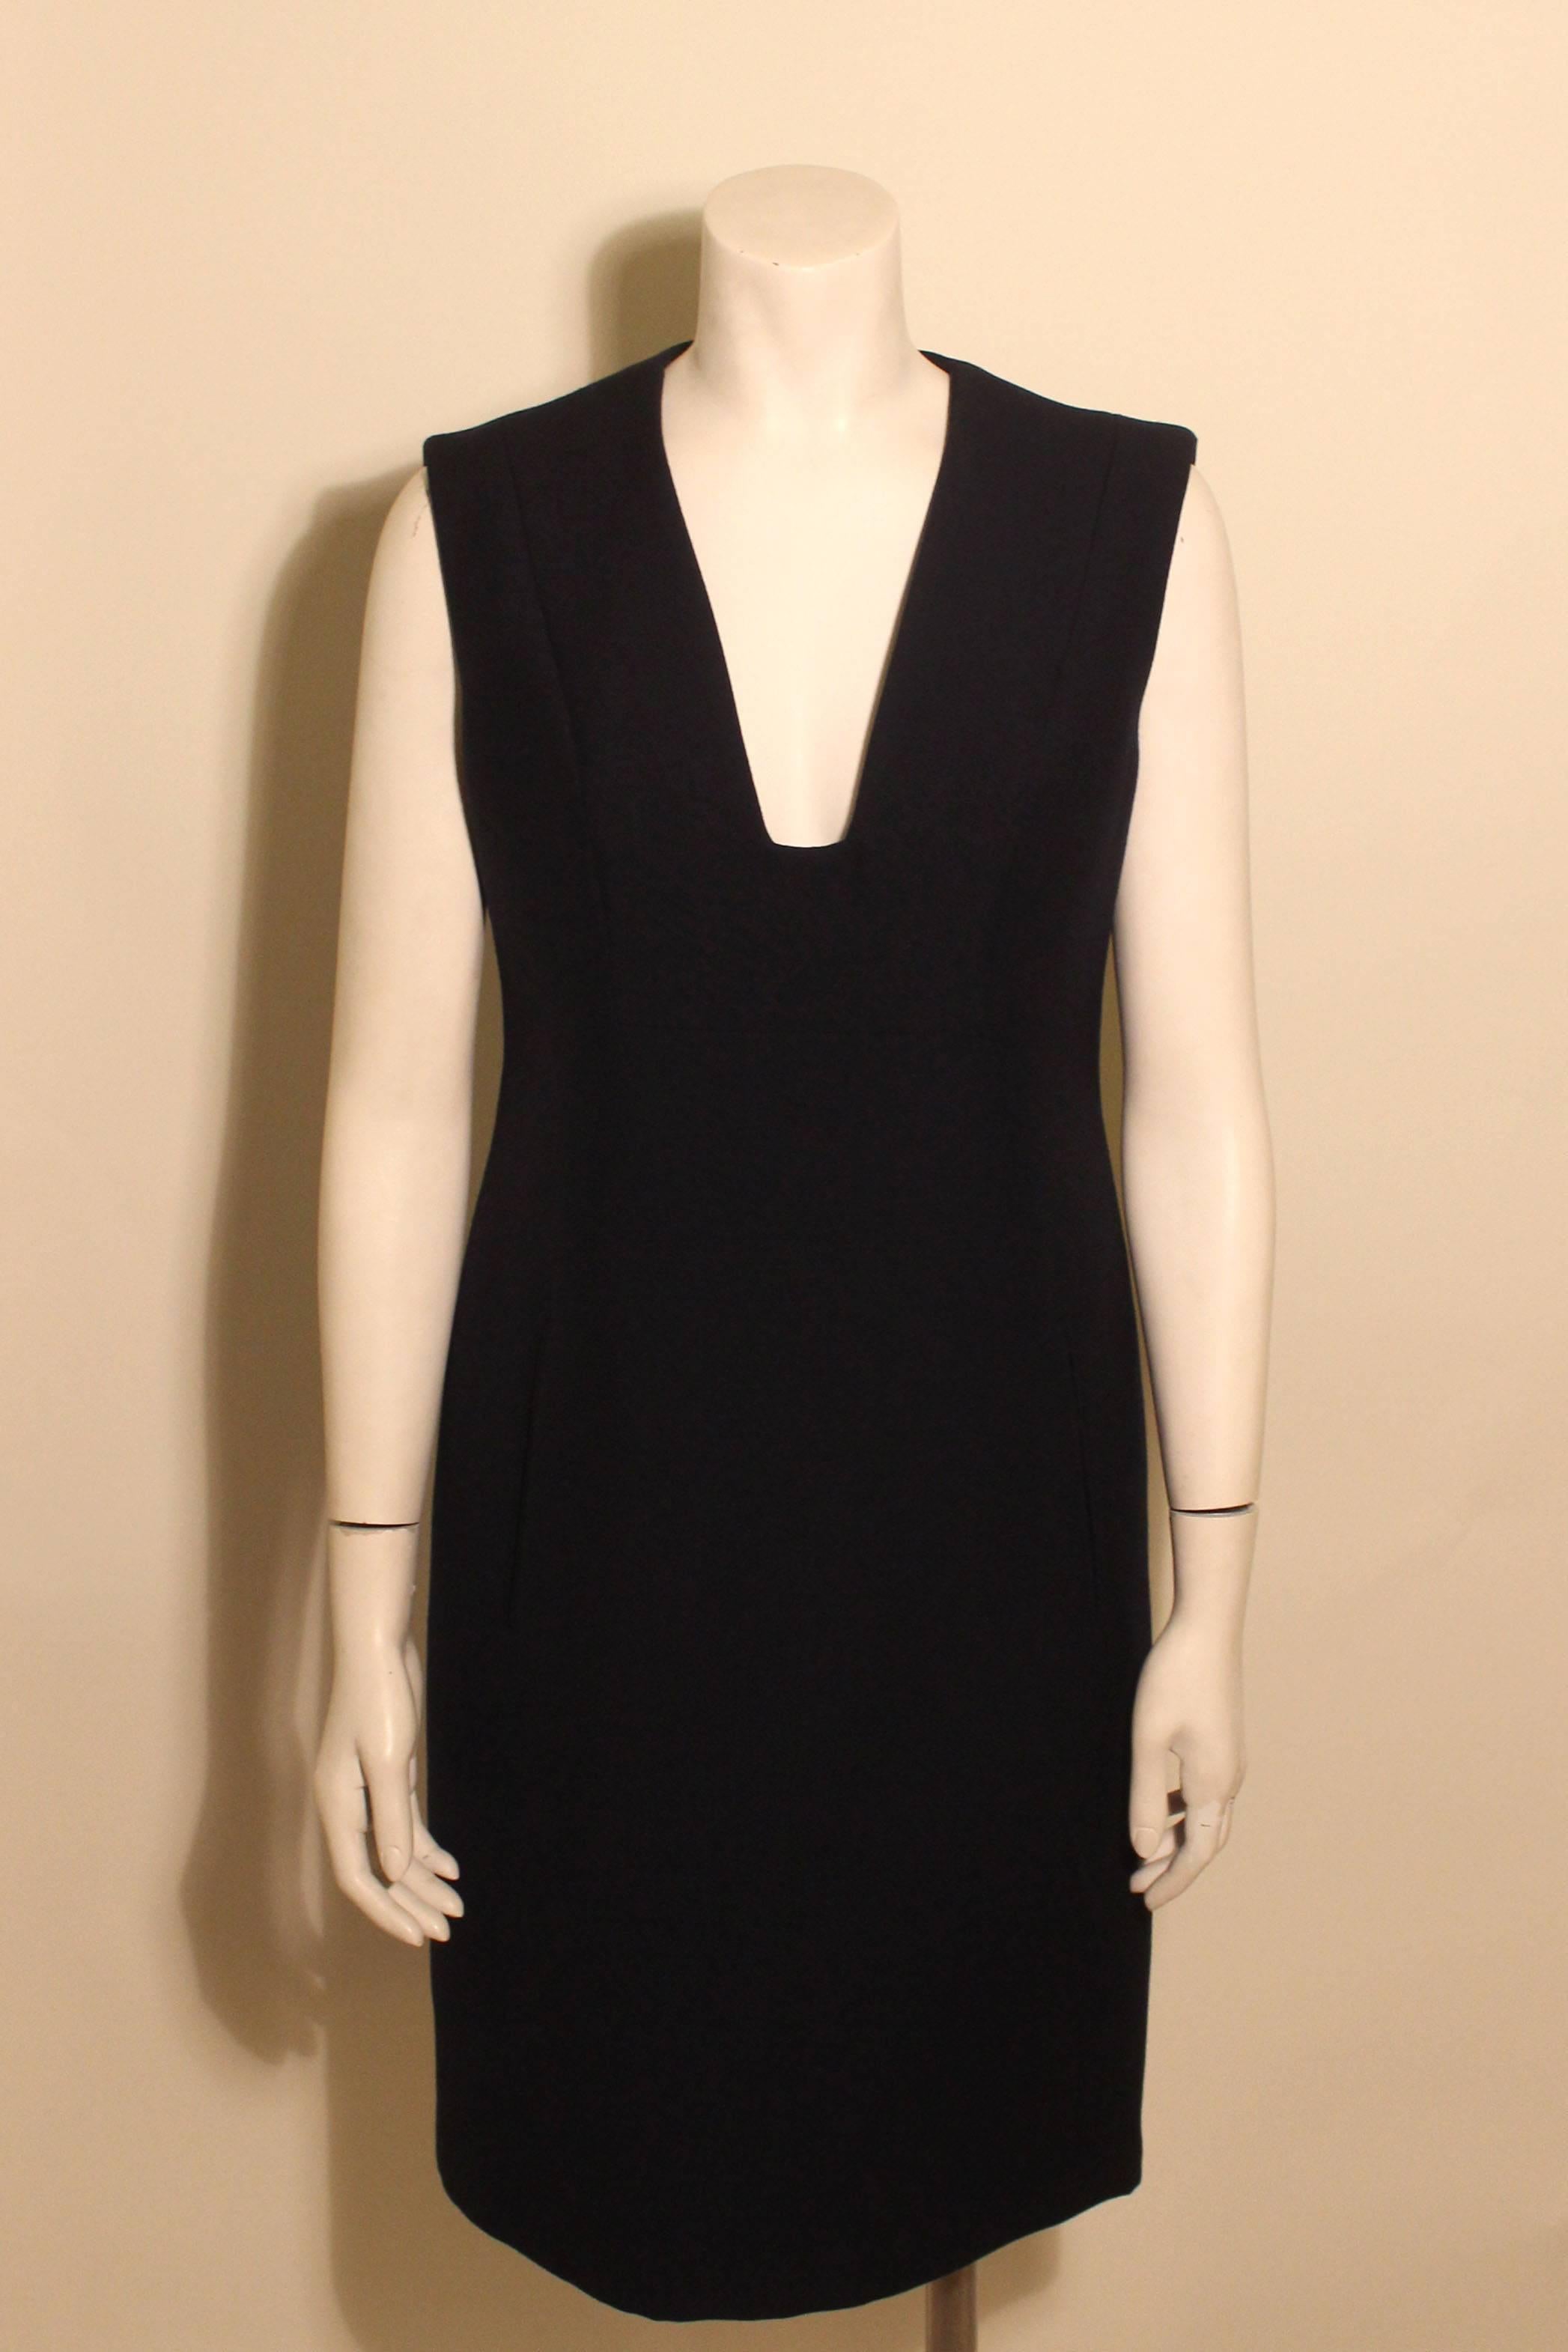 This navy Trigere dress is a classic timeless design. It has a deep v neckline and two front pockets. This chic dress is made of a fine wool and is completely lined. 